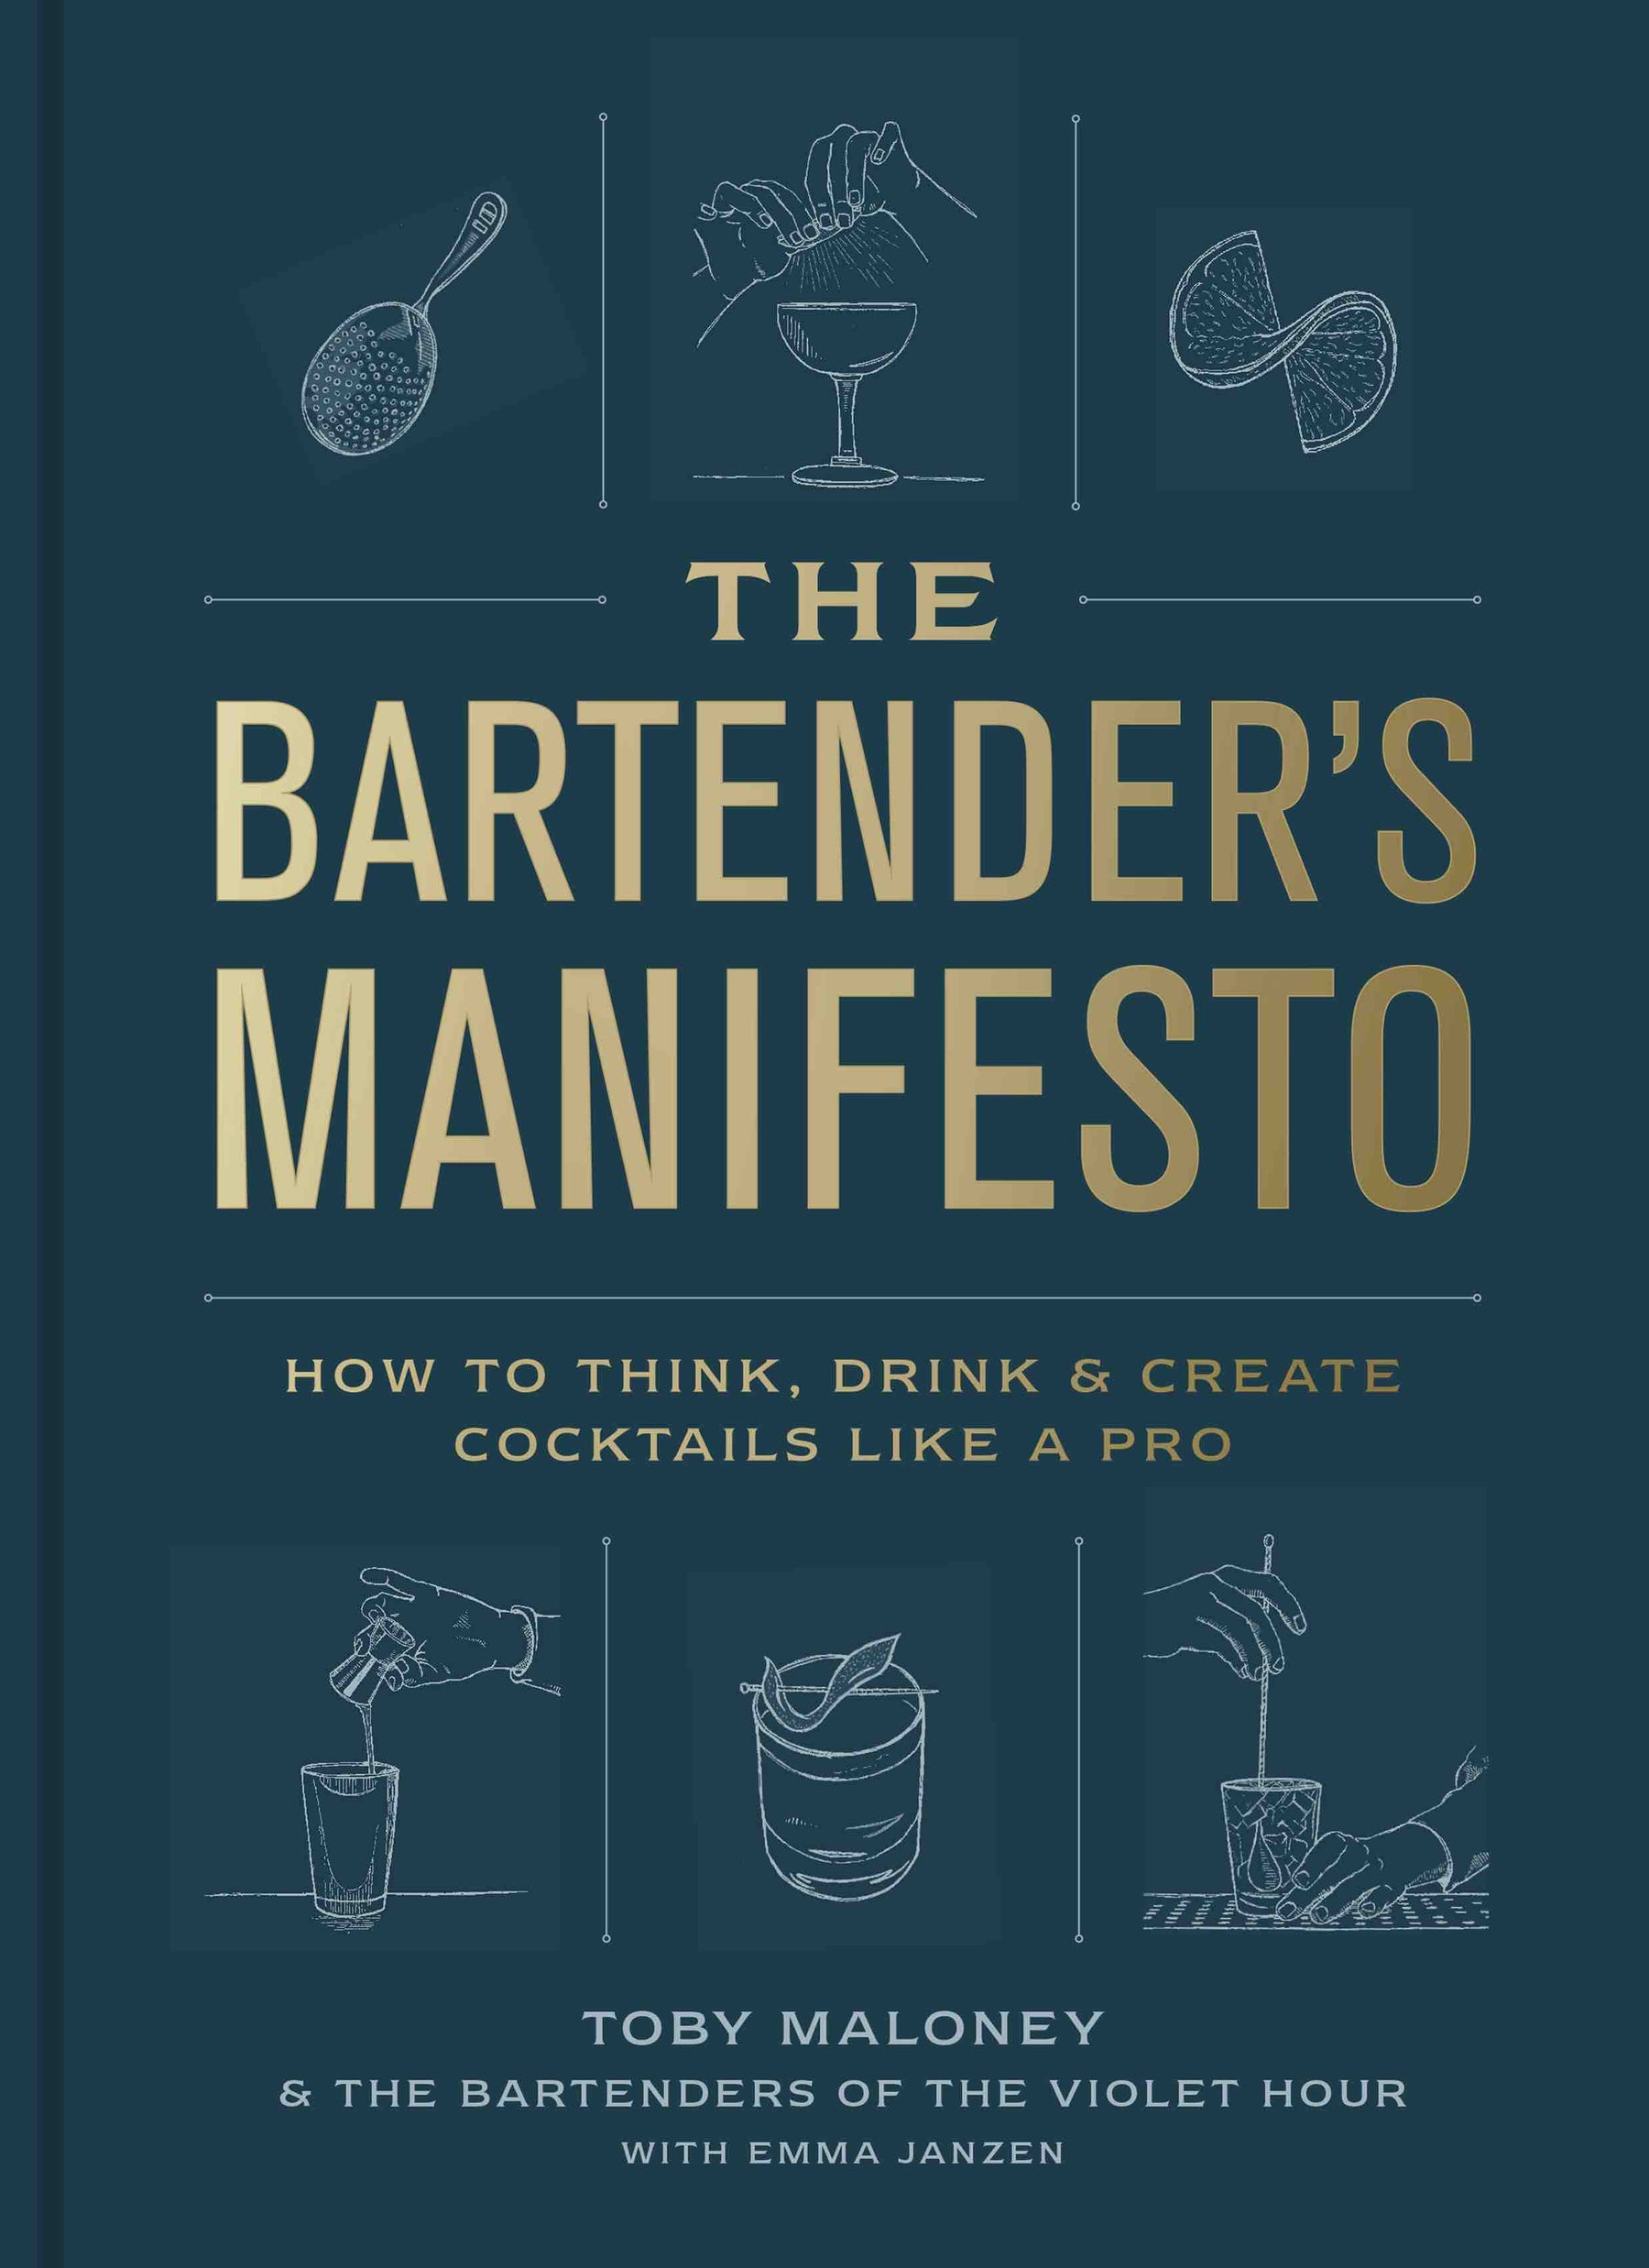 The Bartender's Manifesto | by Toby Maloney, Emma Janzen and The Bartenders of The Violet Hour - Random House - Bluecashew Kitchen Homestead